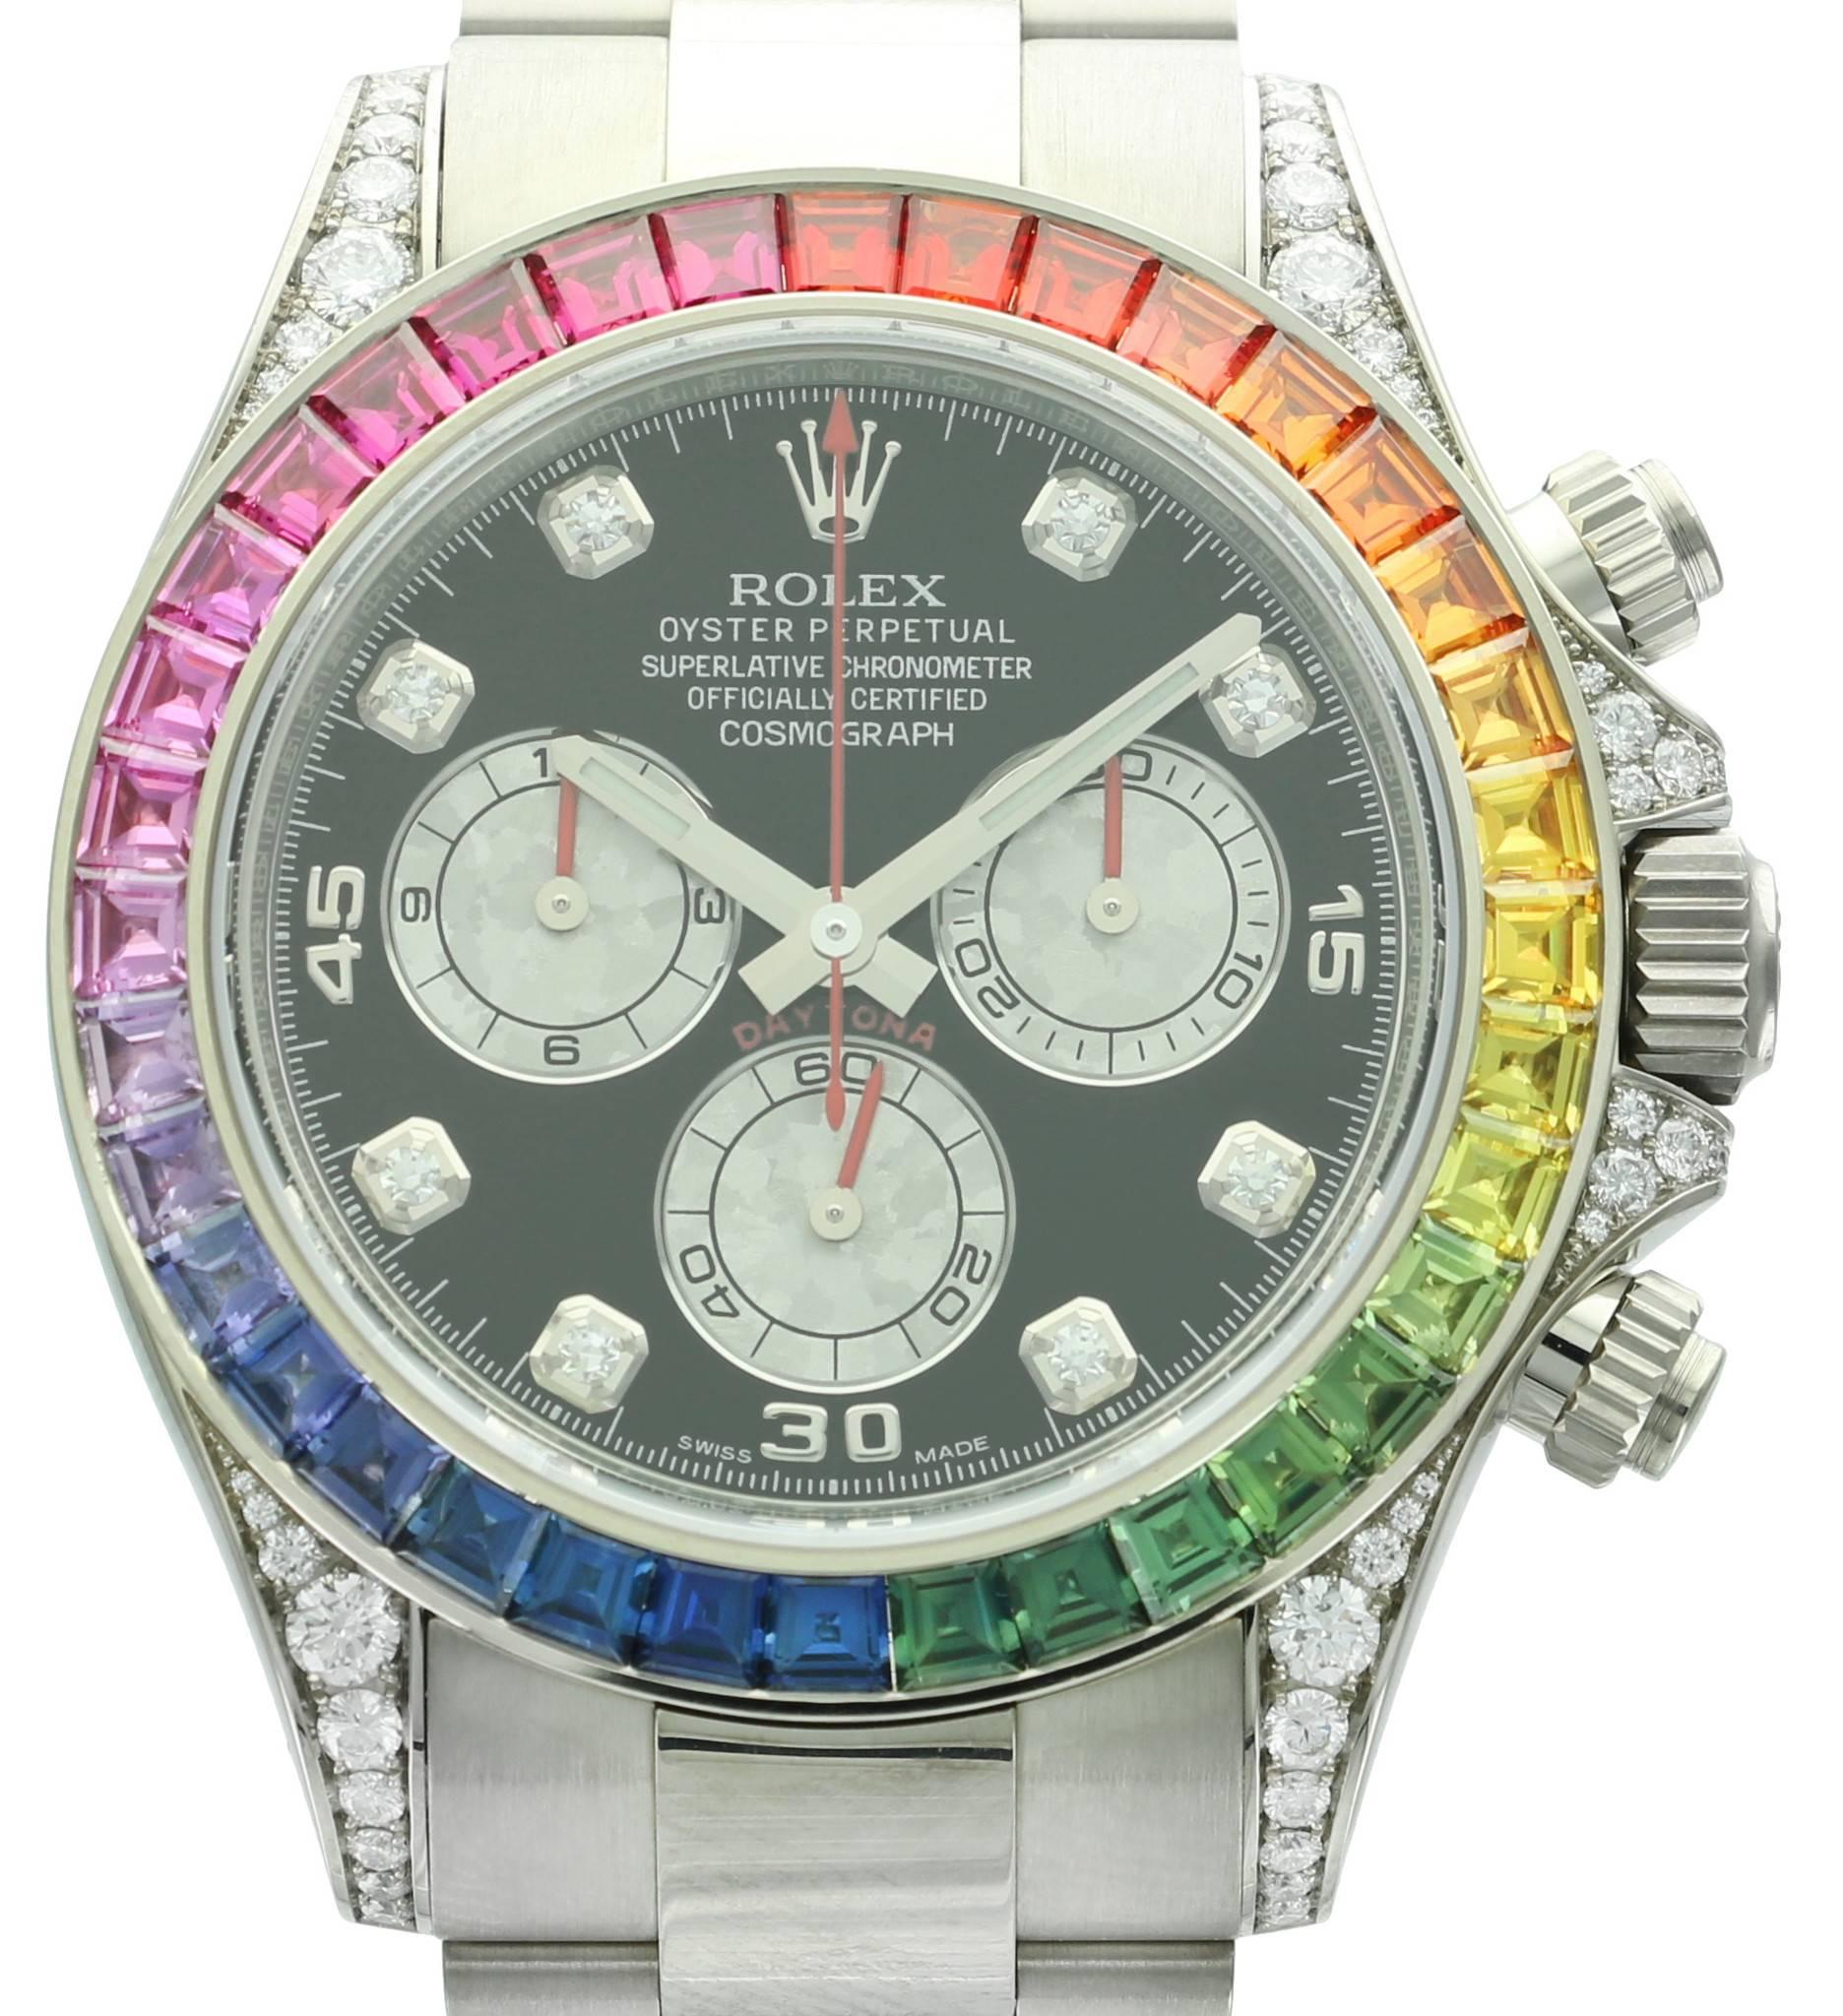 Produced in very limited quantities, this white gold Rolex Daytona, ref. 116599 is fitted with 36 baguette rainbow sapphires, diamond lugs and diamond markers. Because this model was produced in such low quantities and has become highly sought